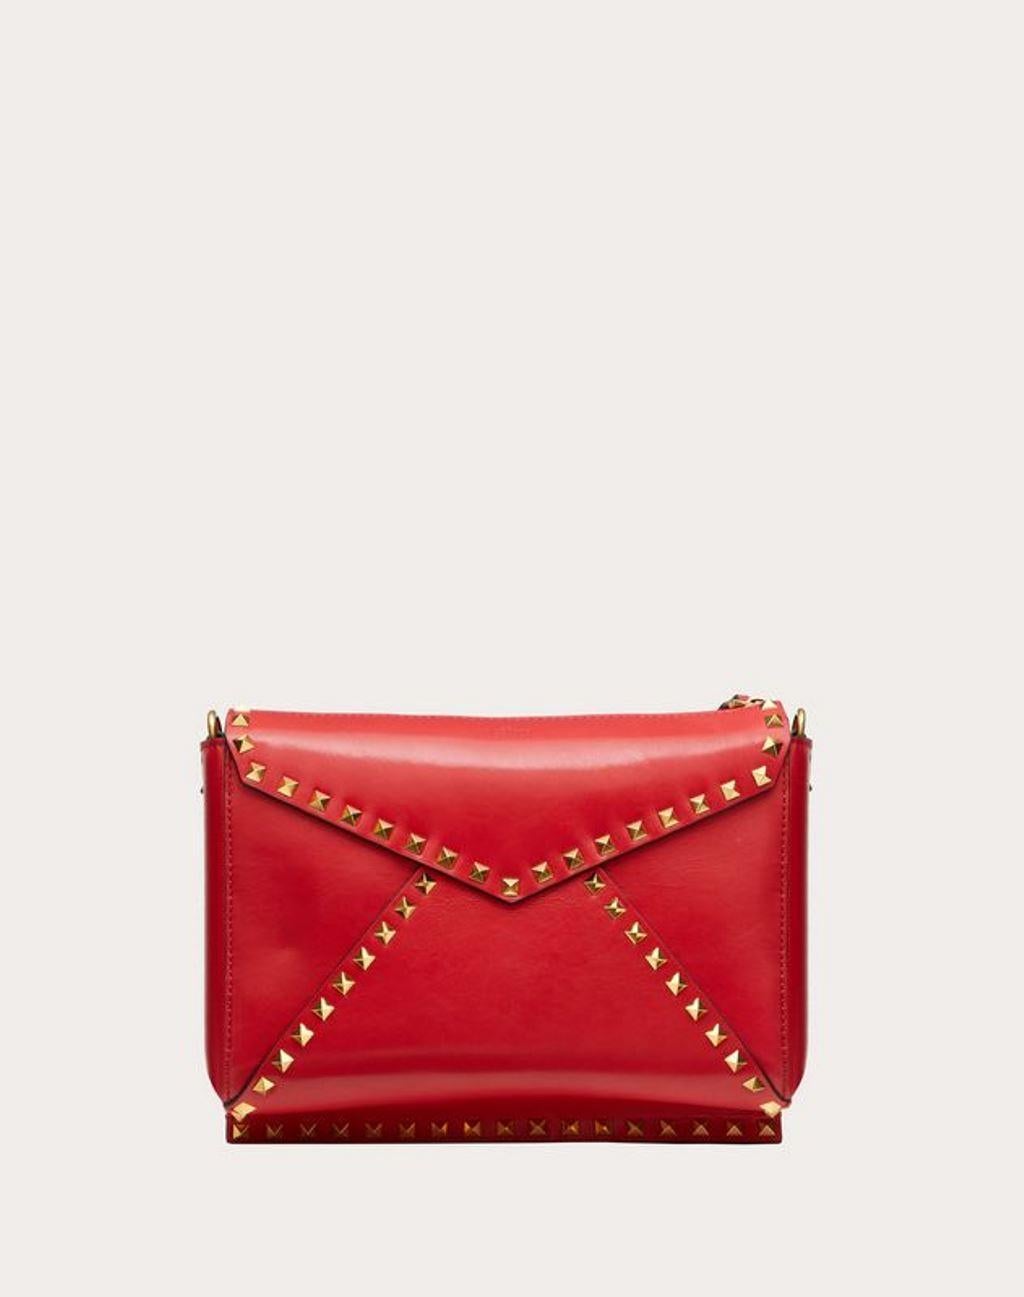 The Hype bag by Valentino has a modern design. This one here is crafted from smooth leather and designed with clean Rockstud trims, a shoulder strap, and a flip-lock on the flap. The interior is spacious enough to assist you on all